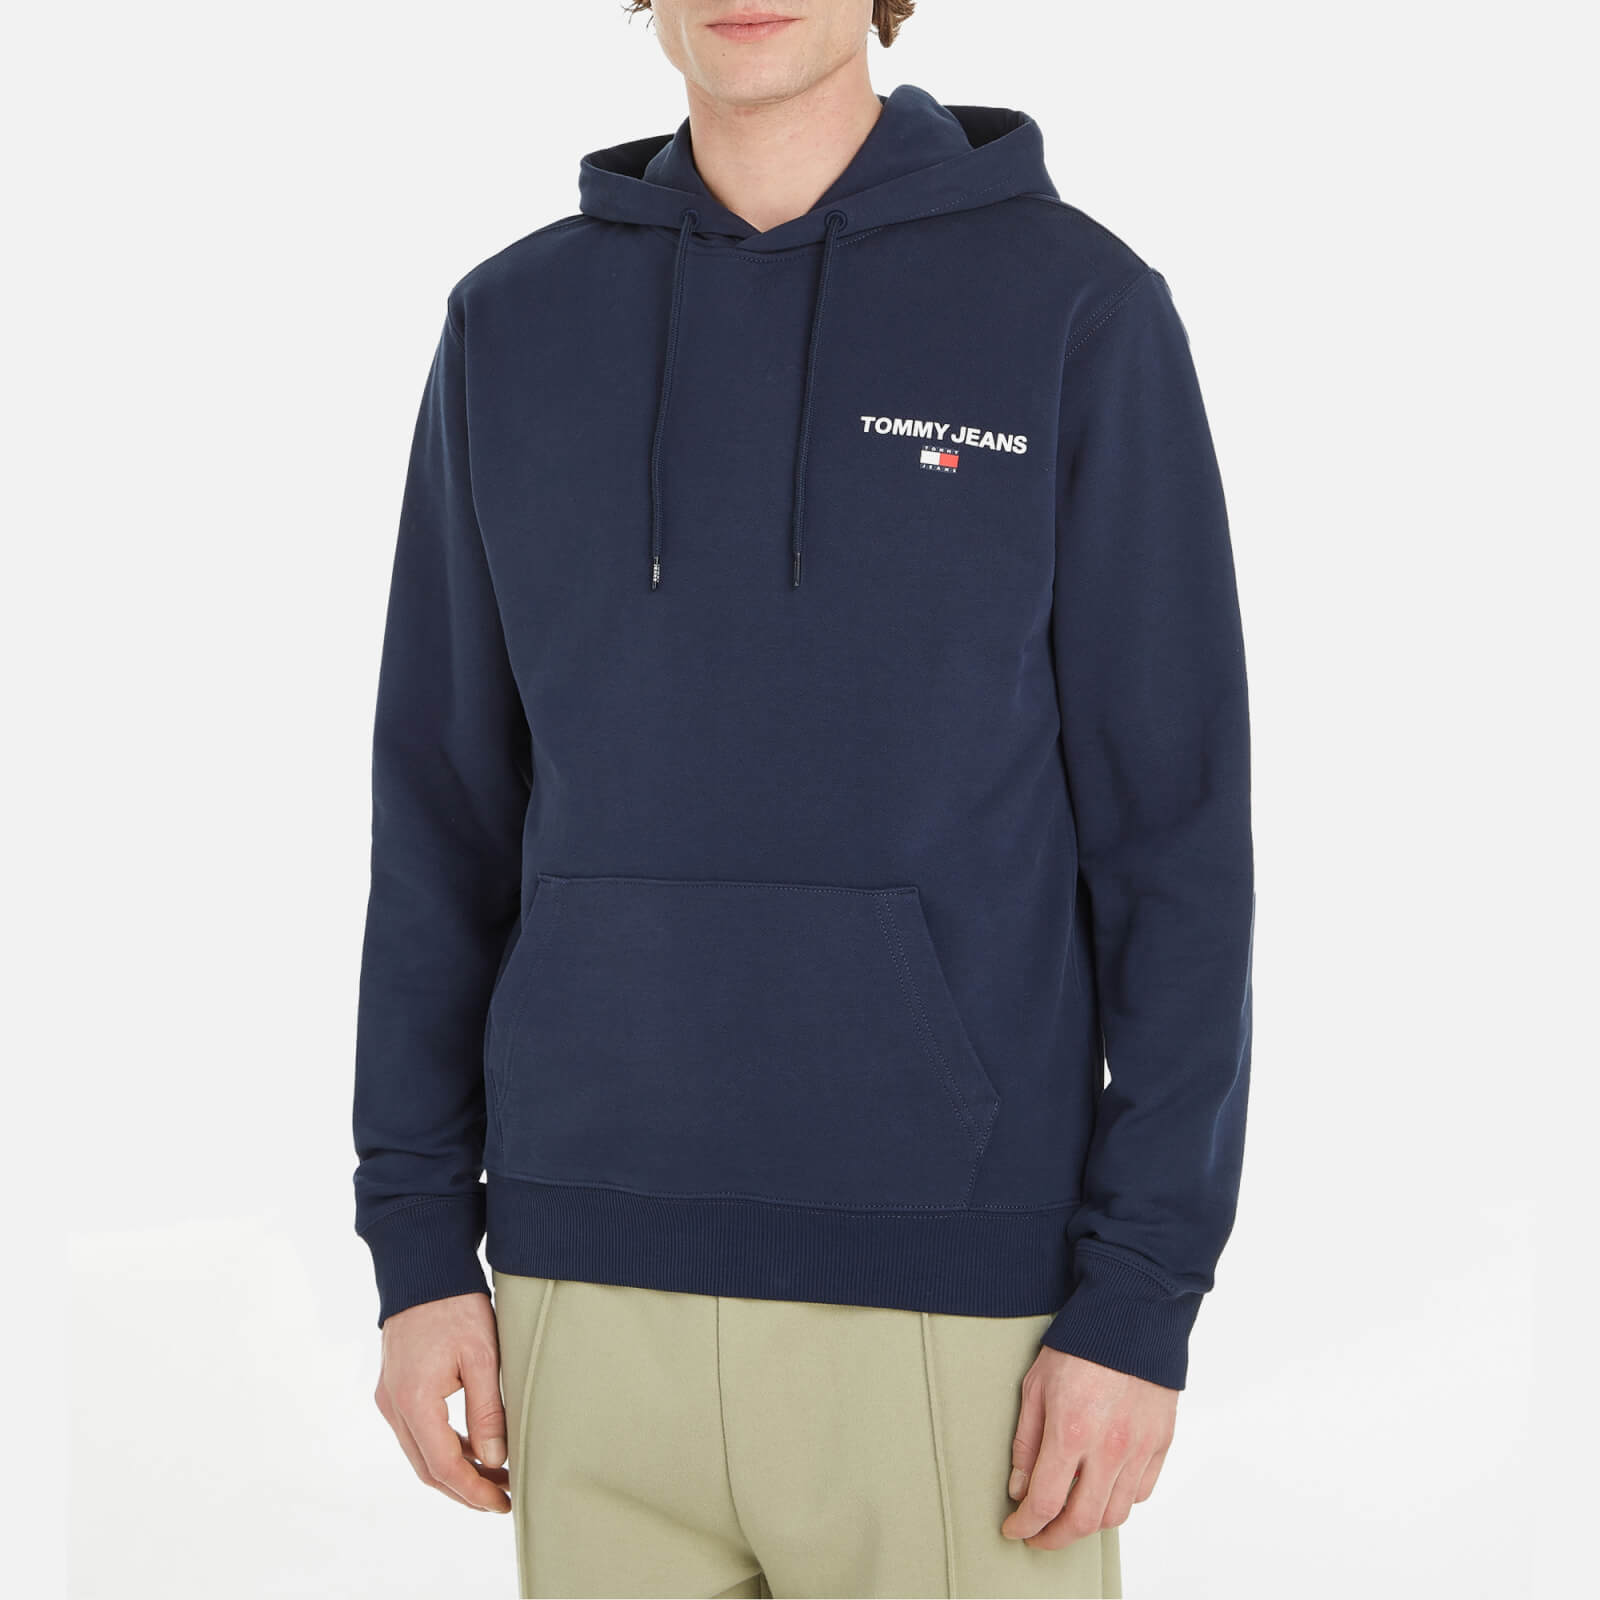 Tommy Jeans Entry Graphic Cotton Hoodie product